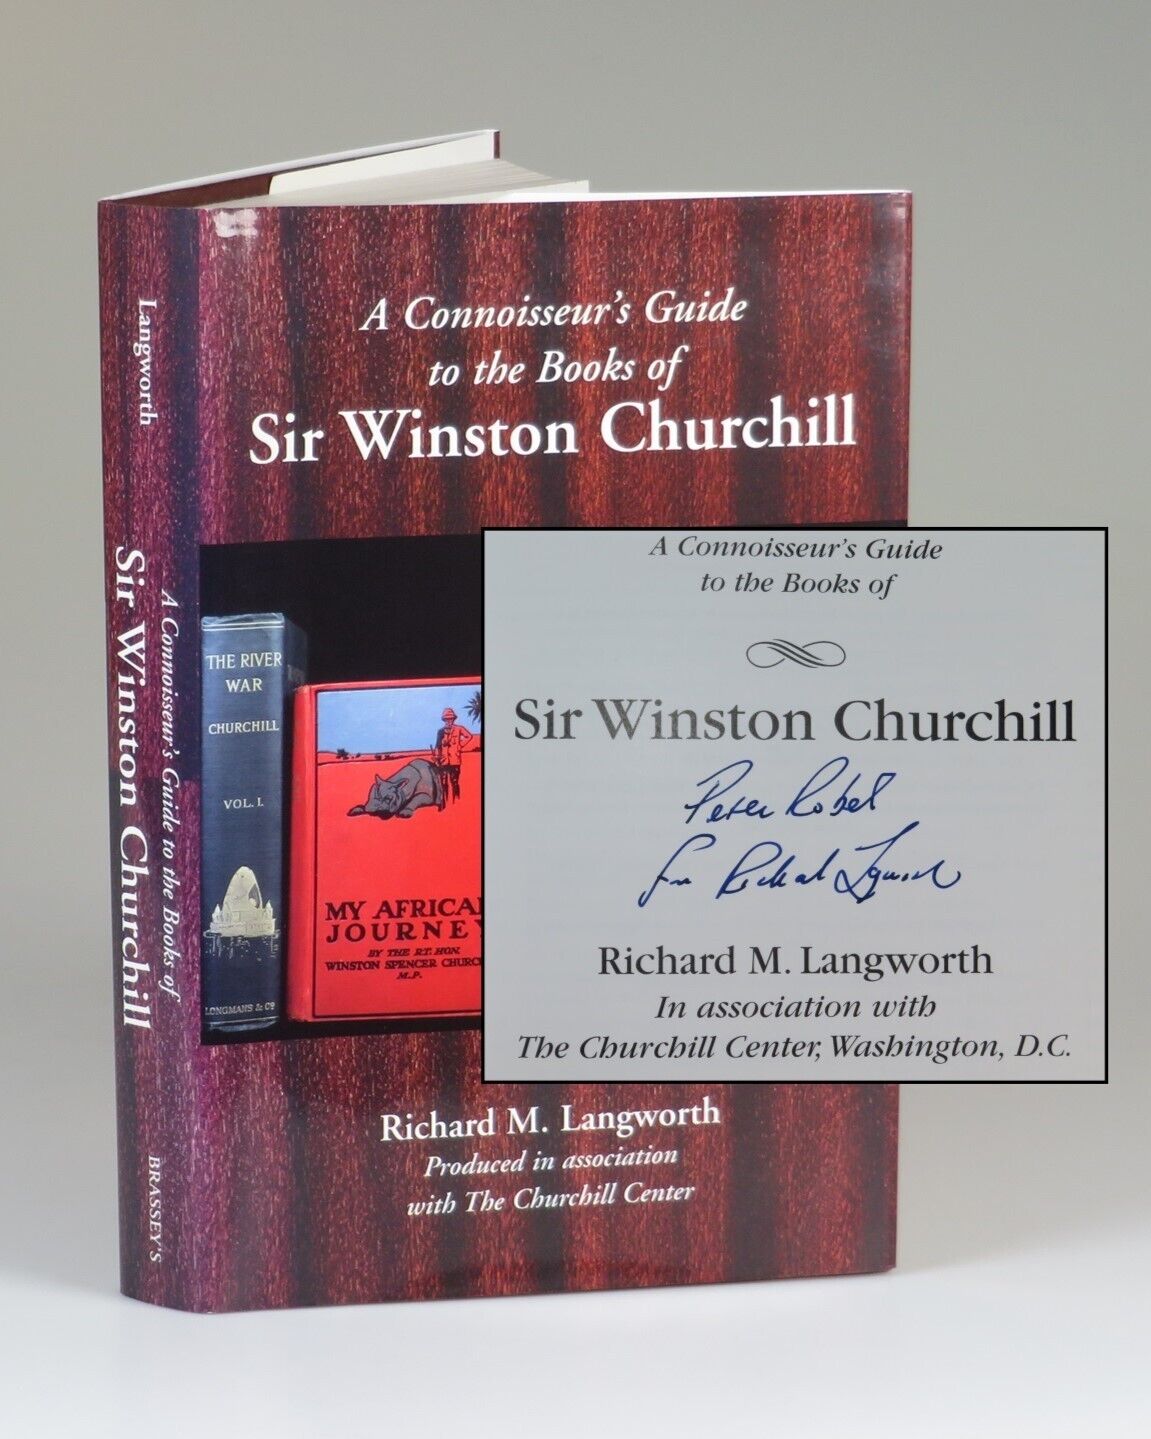 Richard Langworth - A Connoisseur\'s Guide to the Books of Churchill, inscribed